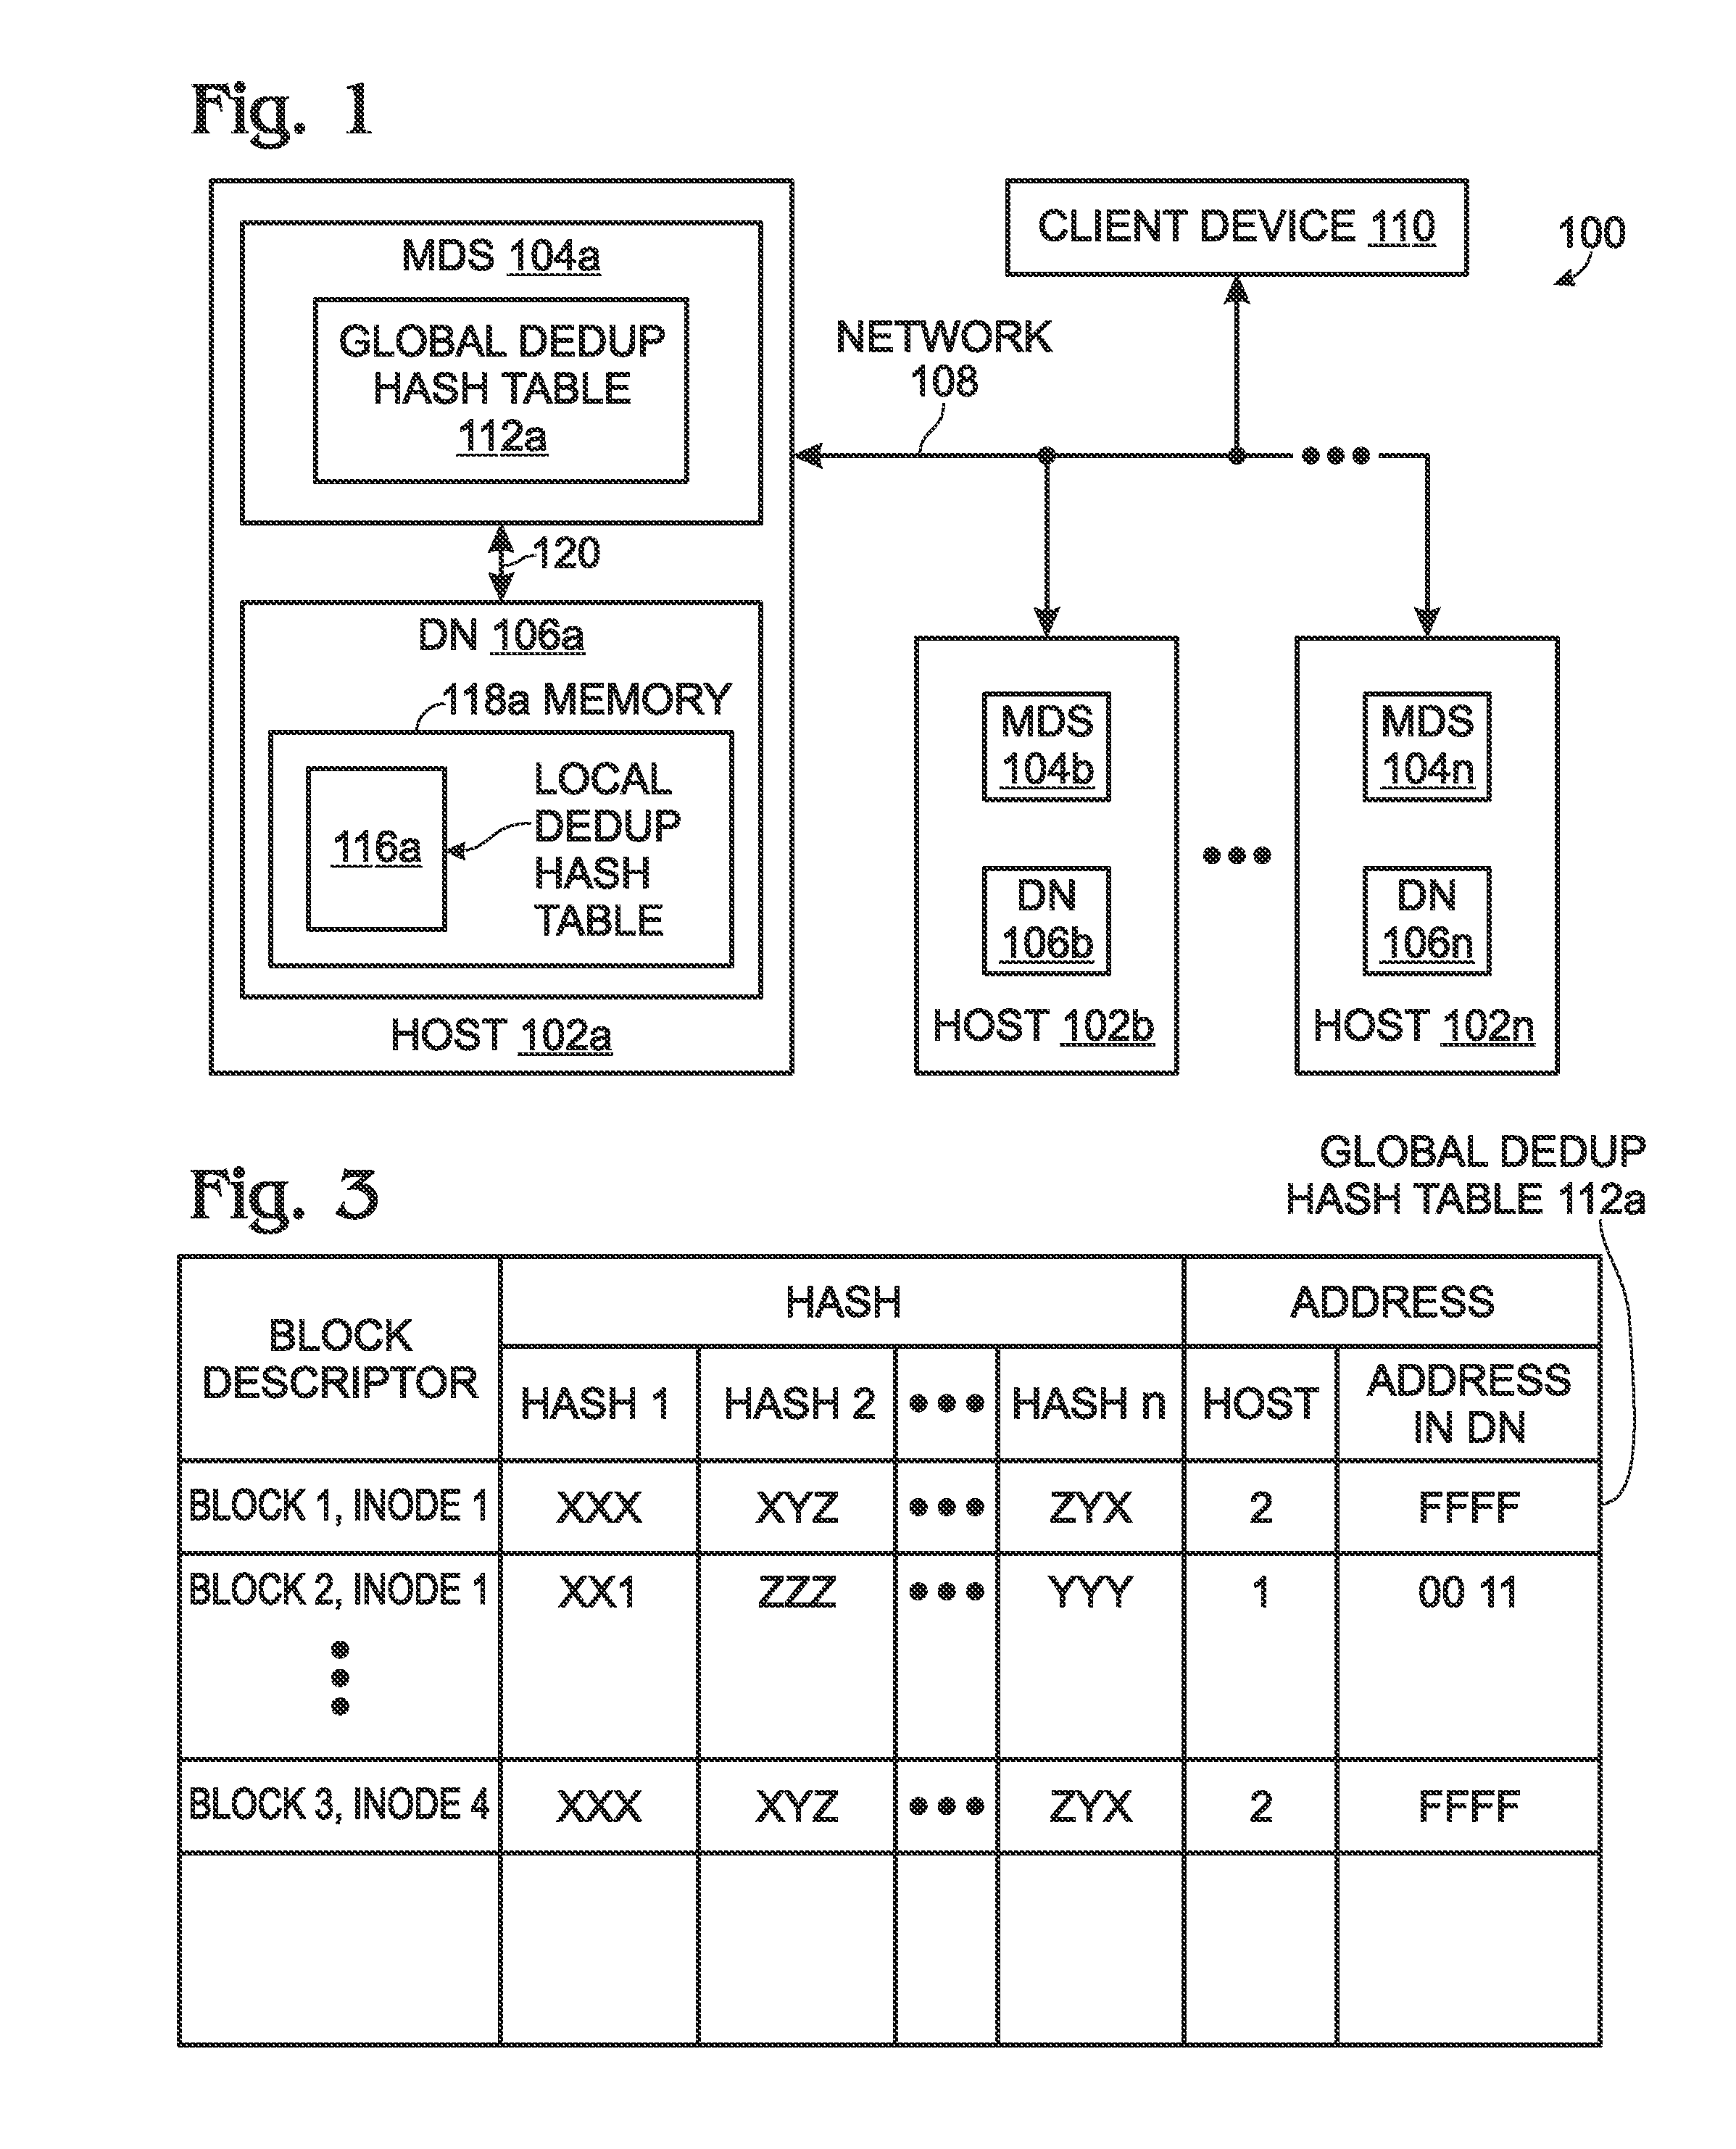 Distributed file system with client-side deduplication capacity